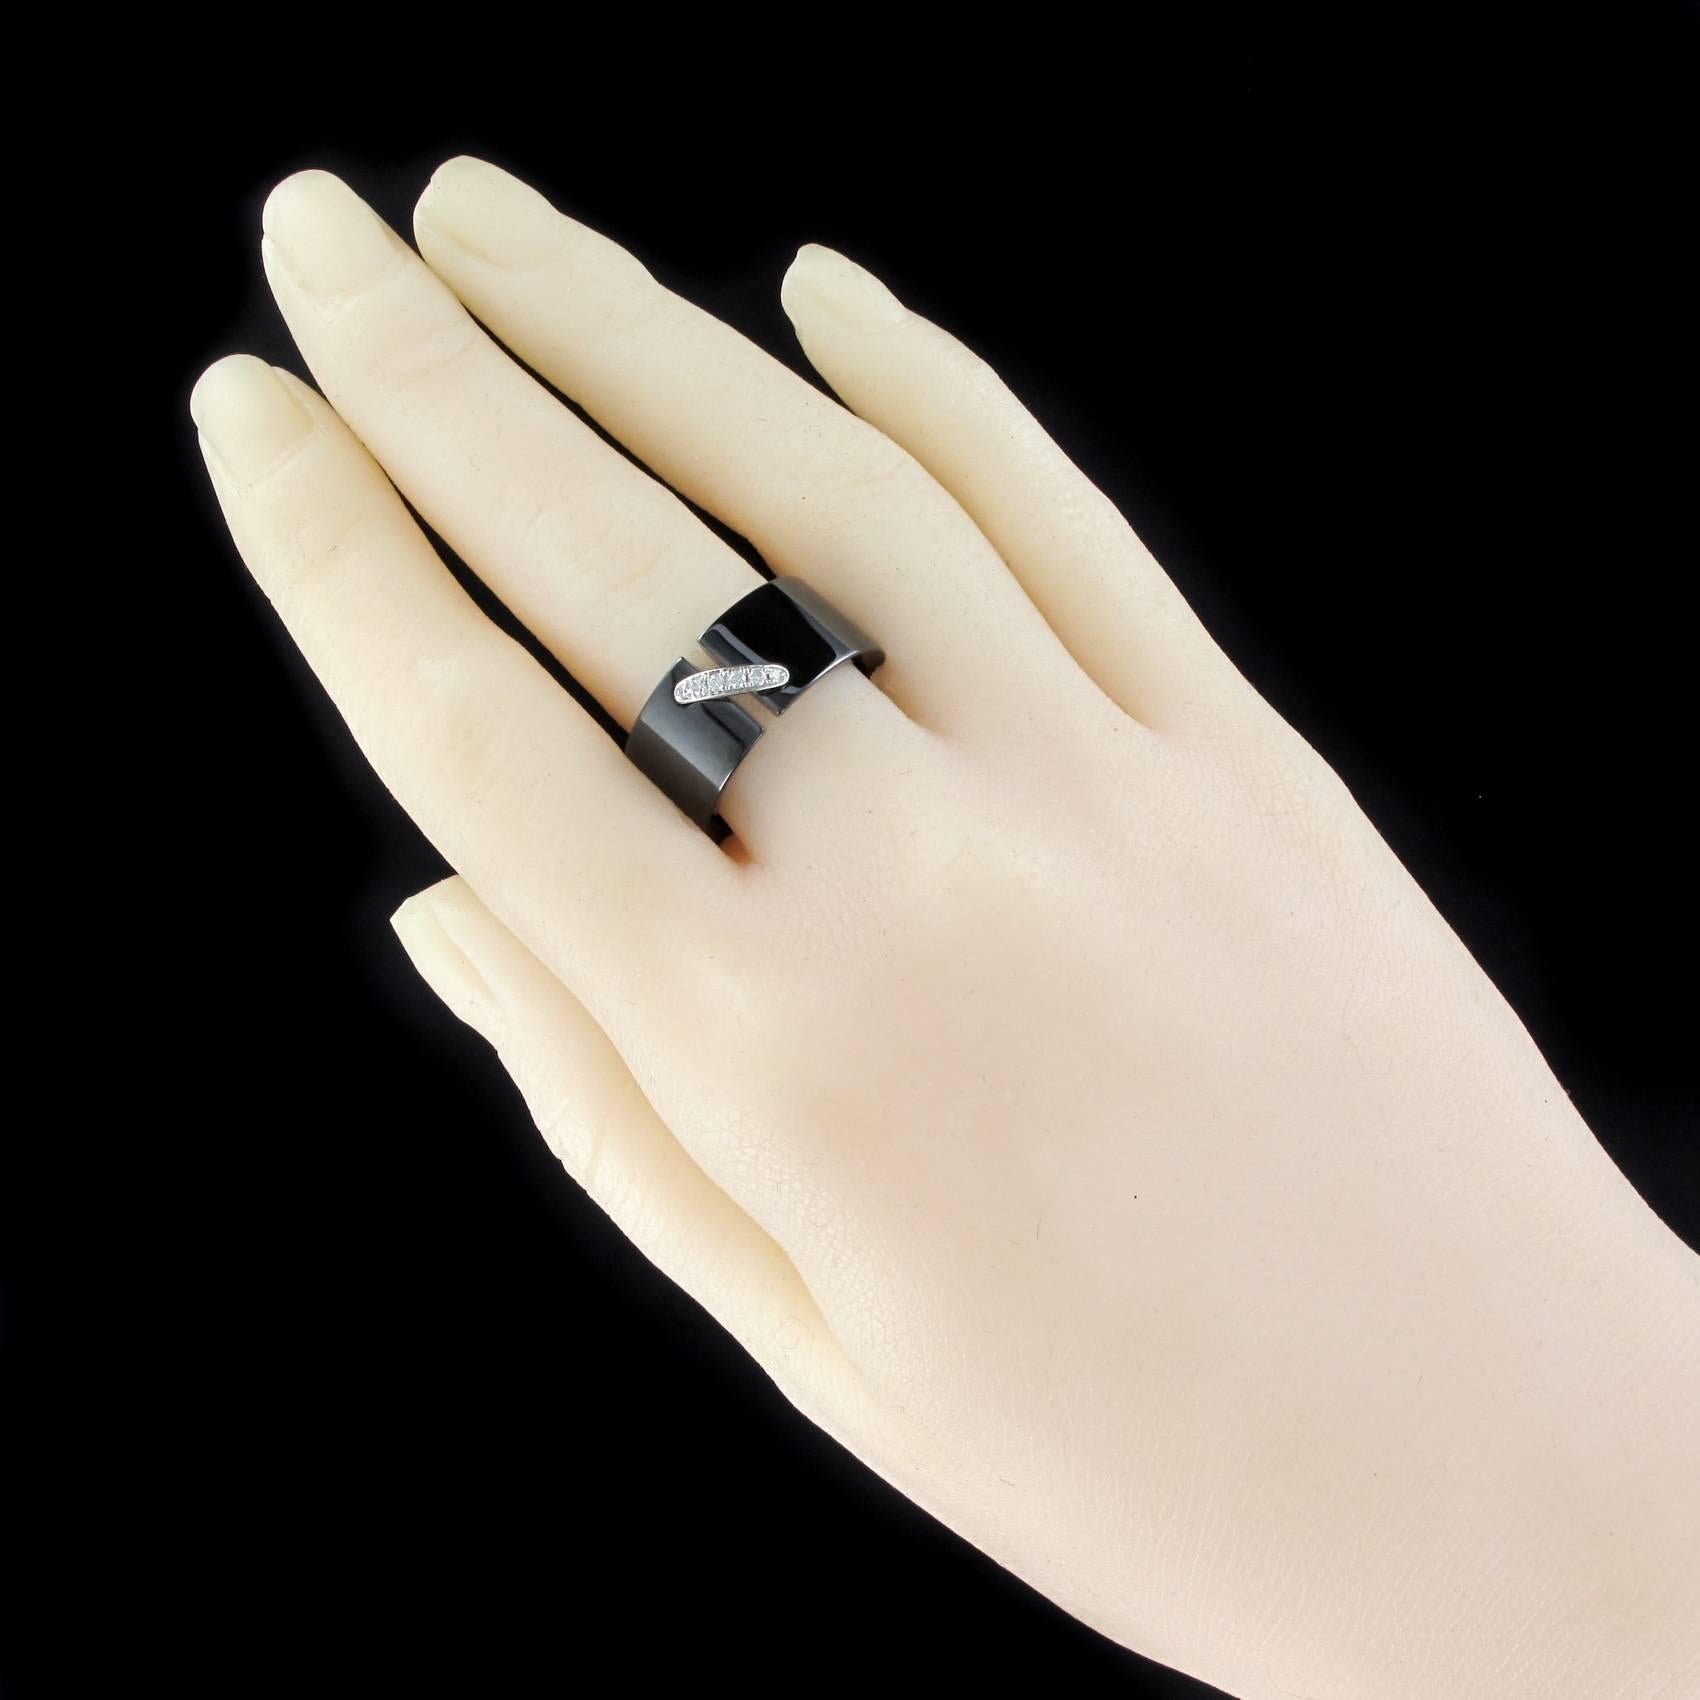 Pearly black ceramic ring.
Signed Chaumet, this ring from the Lien Collection is a wide open flat ring on the front and set with a line of 6 brilliant-cut diamonds.
Diamonds ceramic ring signed Chaumet inside the ring.
Numbered: 1267304.
Height: 9.9